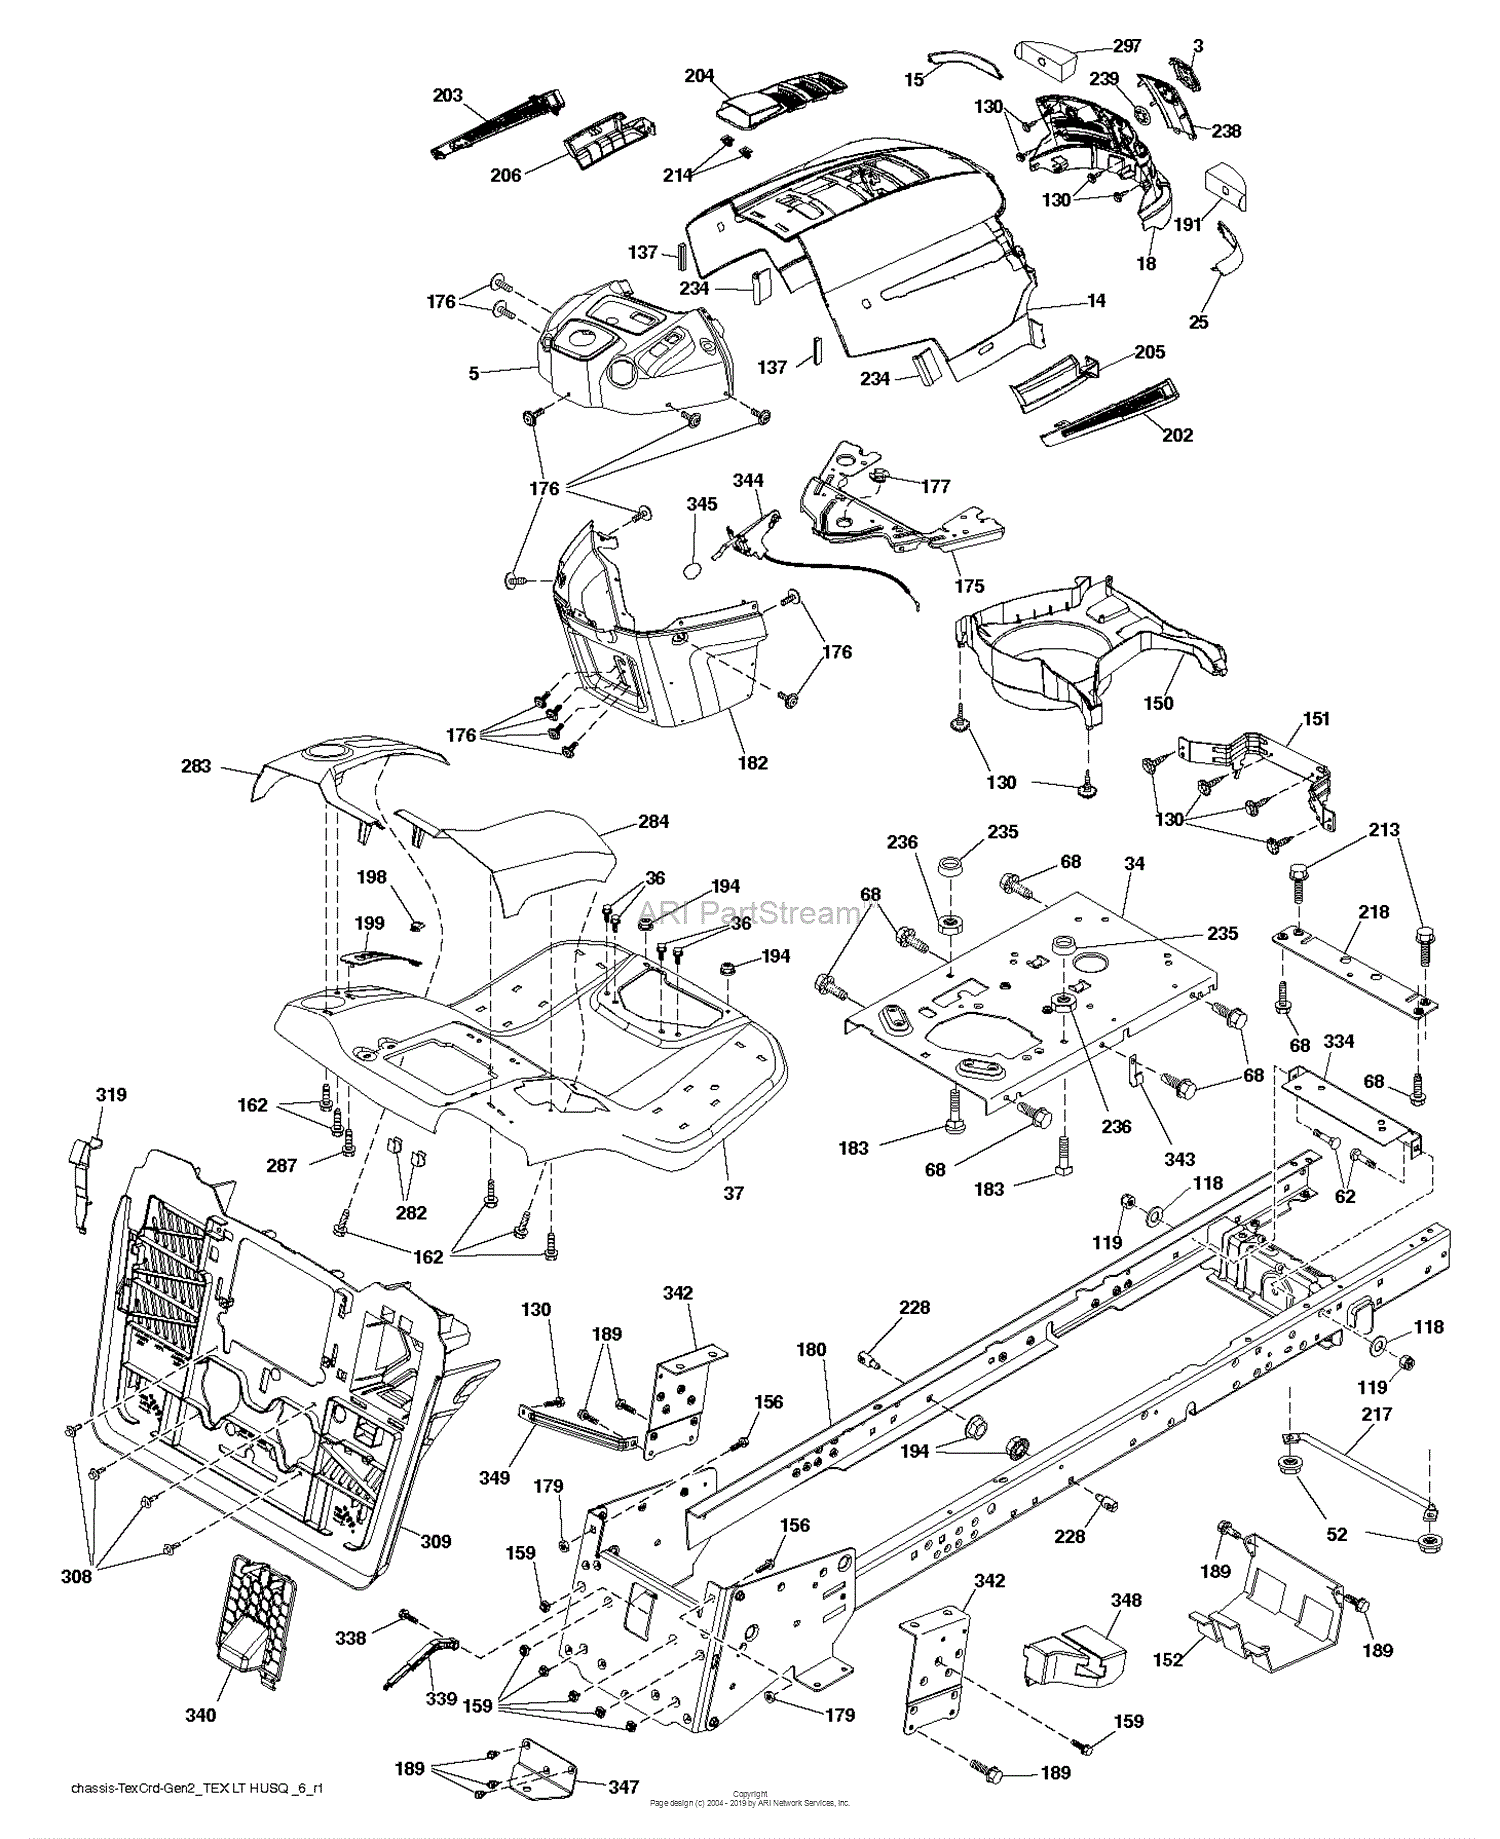 Husqvarna CTH194 - 96051002902 (2012-07) Parts Diagram for CHASSIS ...